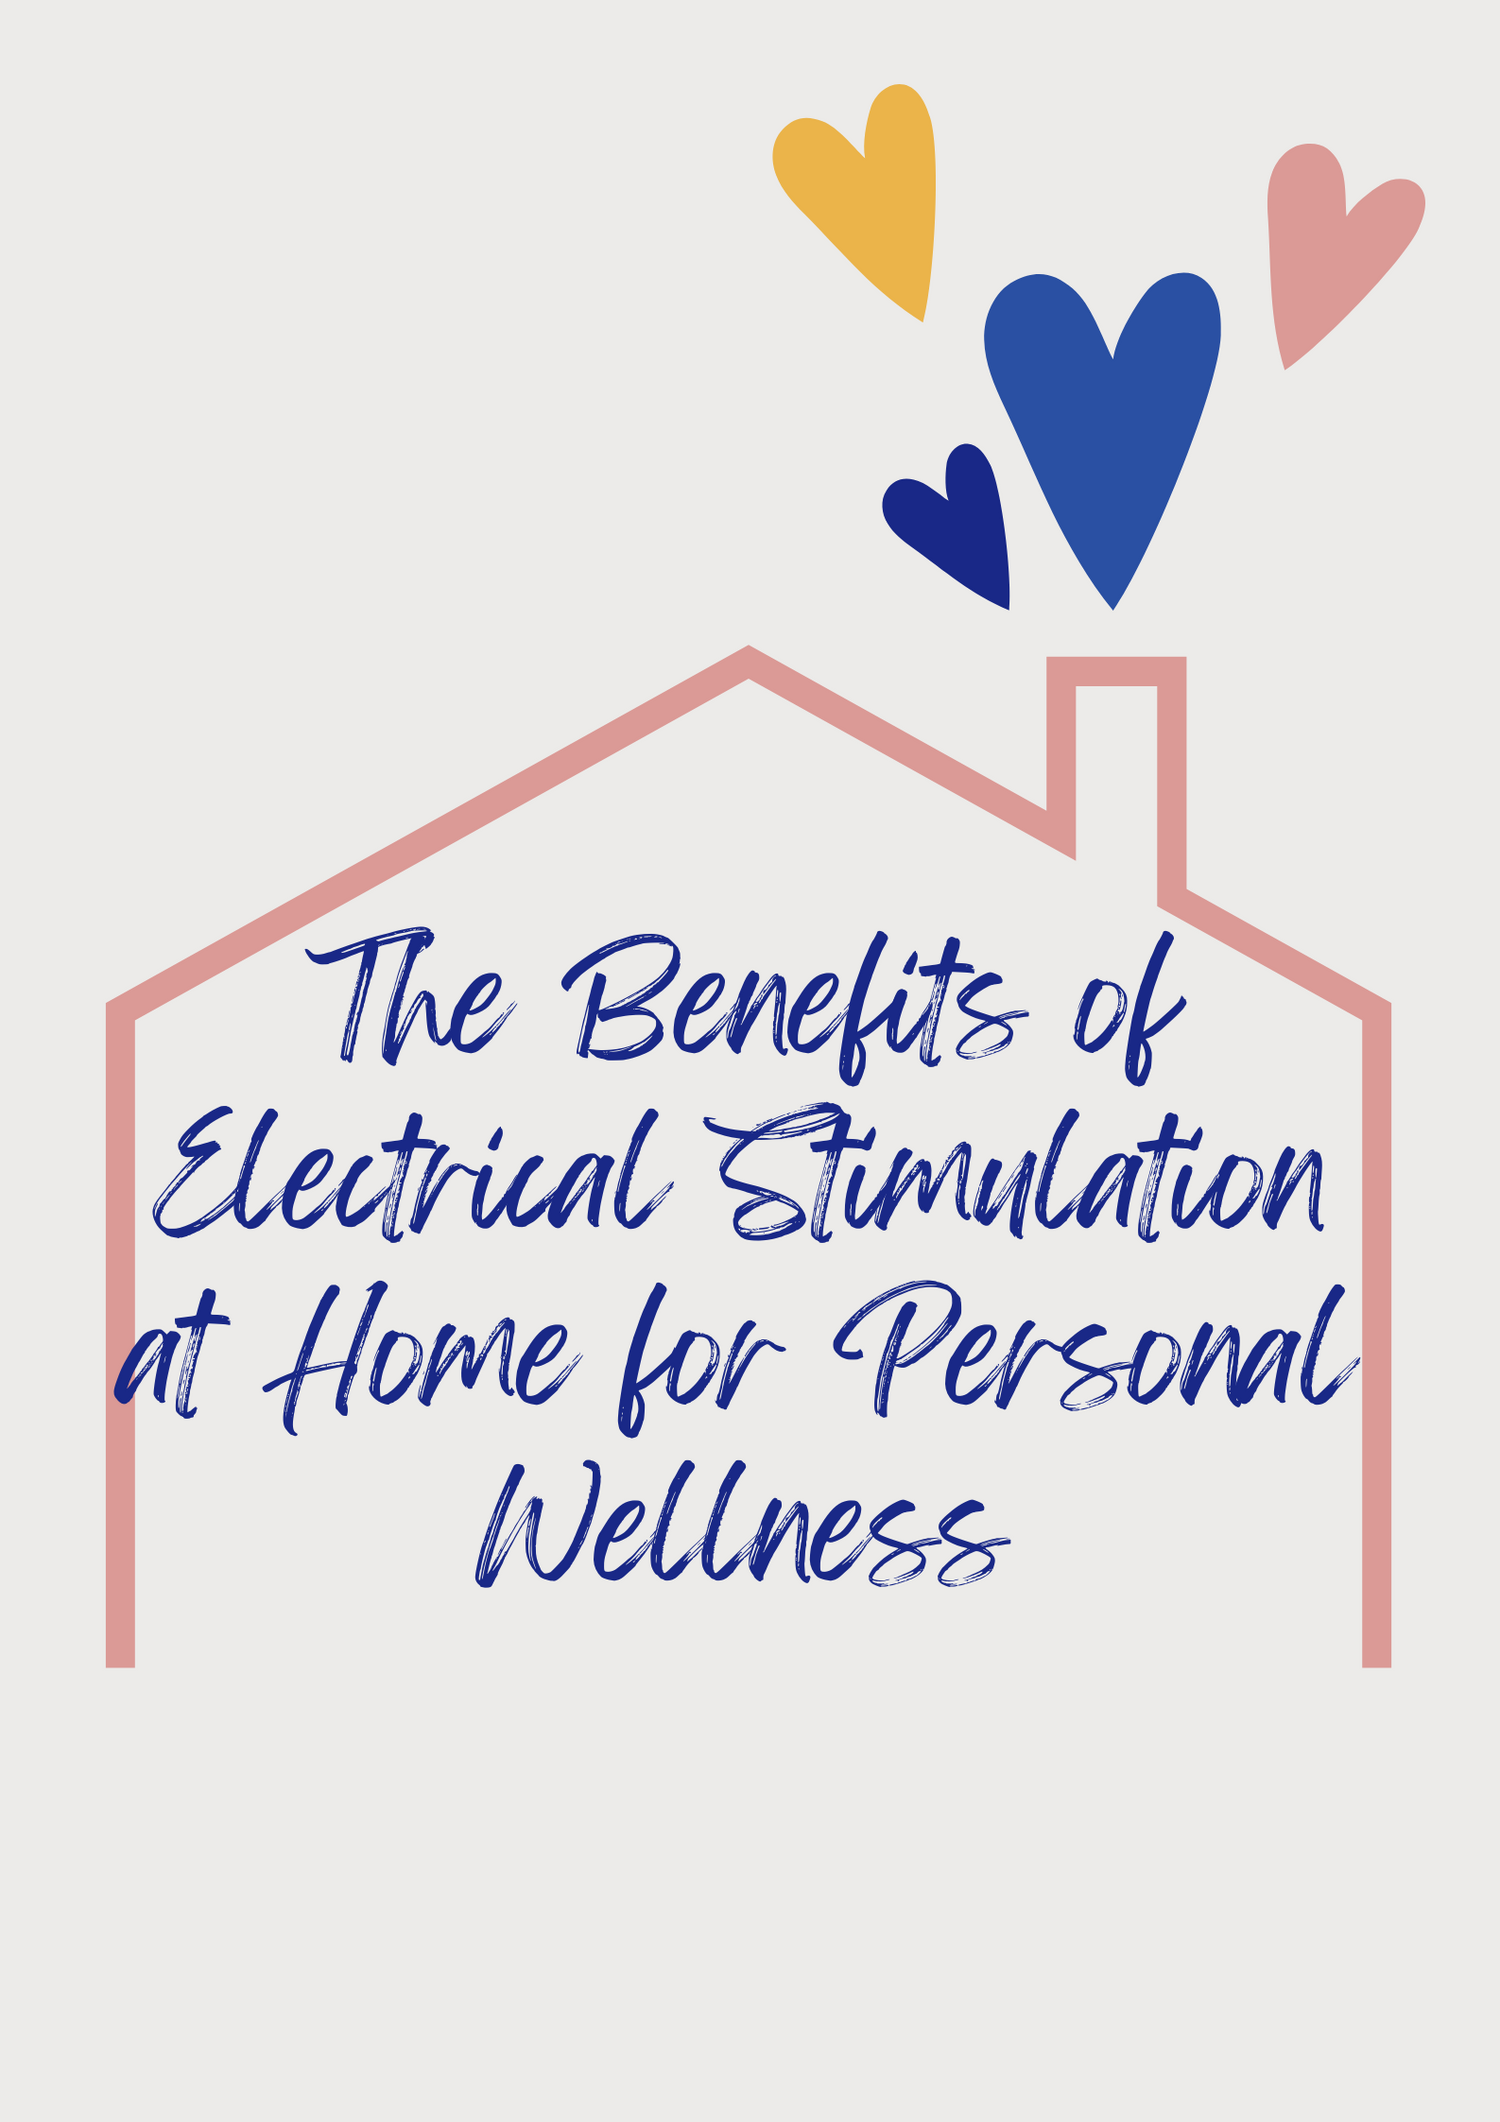 Electrical Stimulation at Home